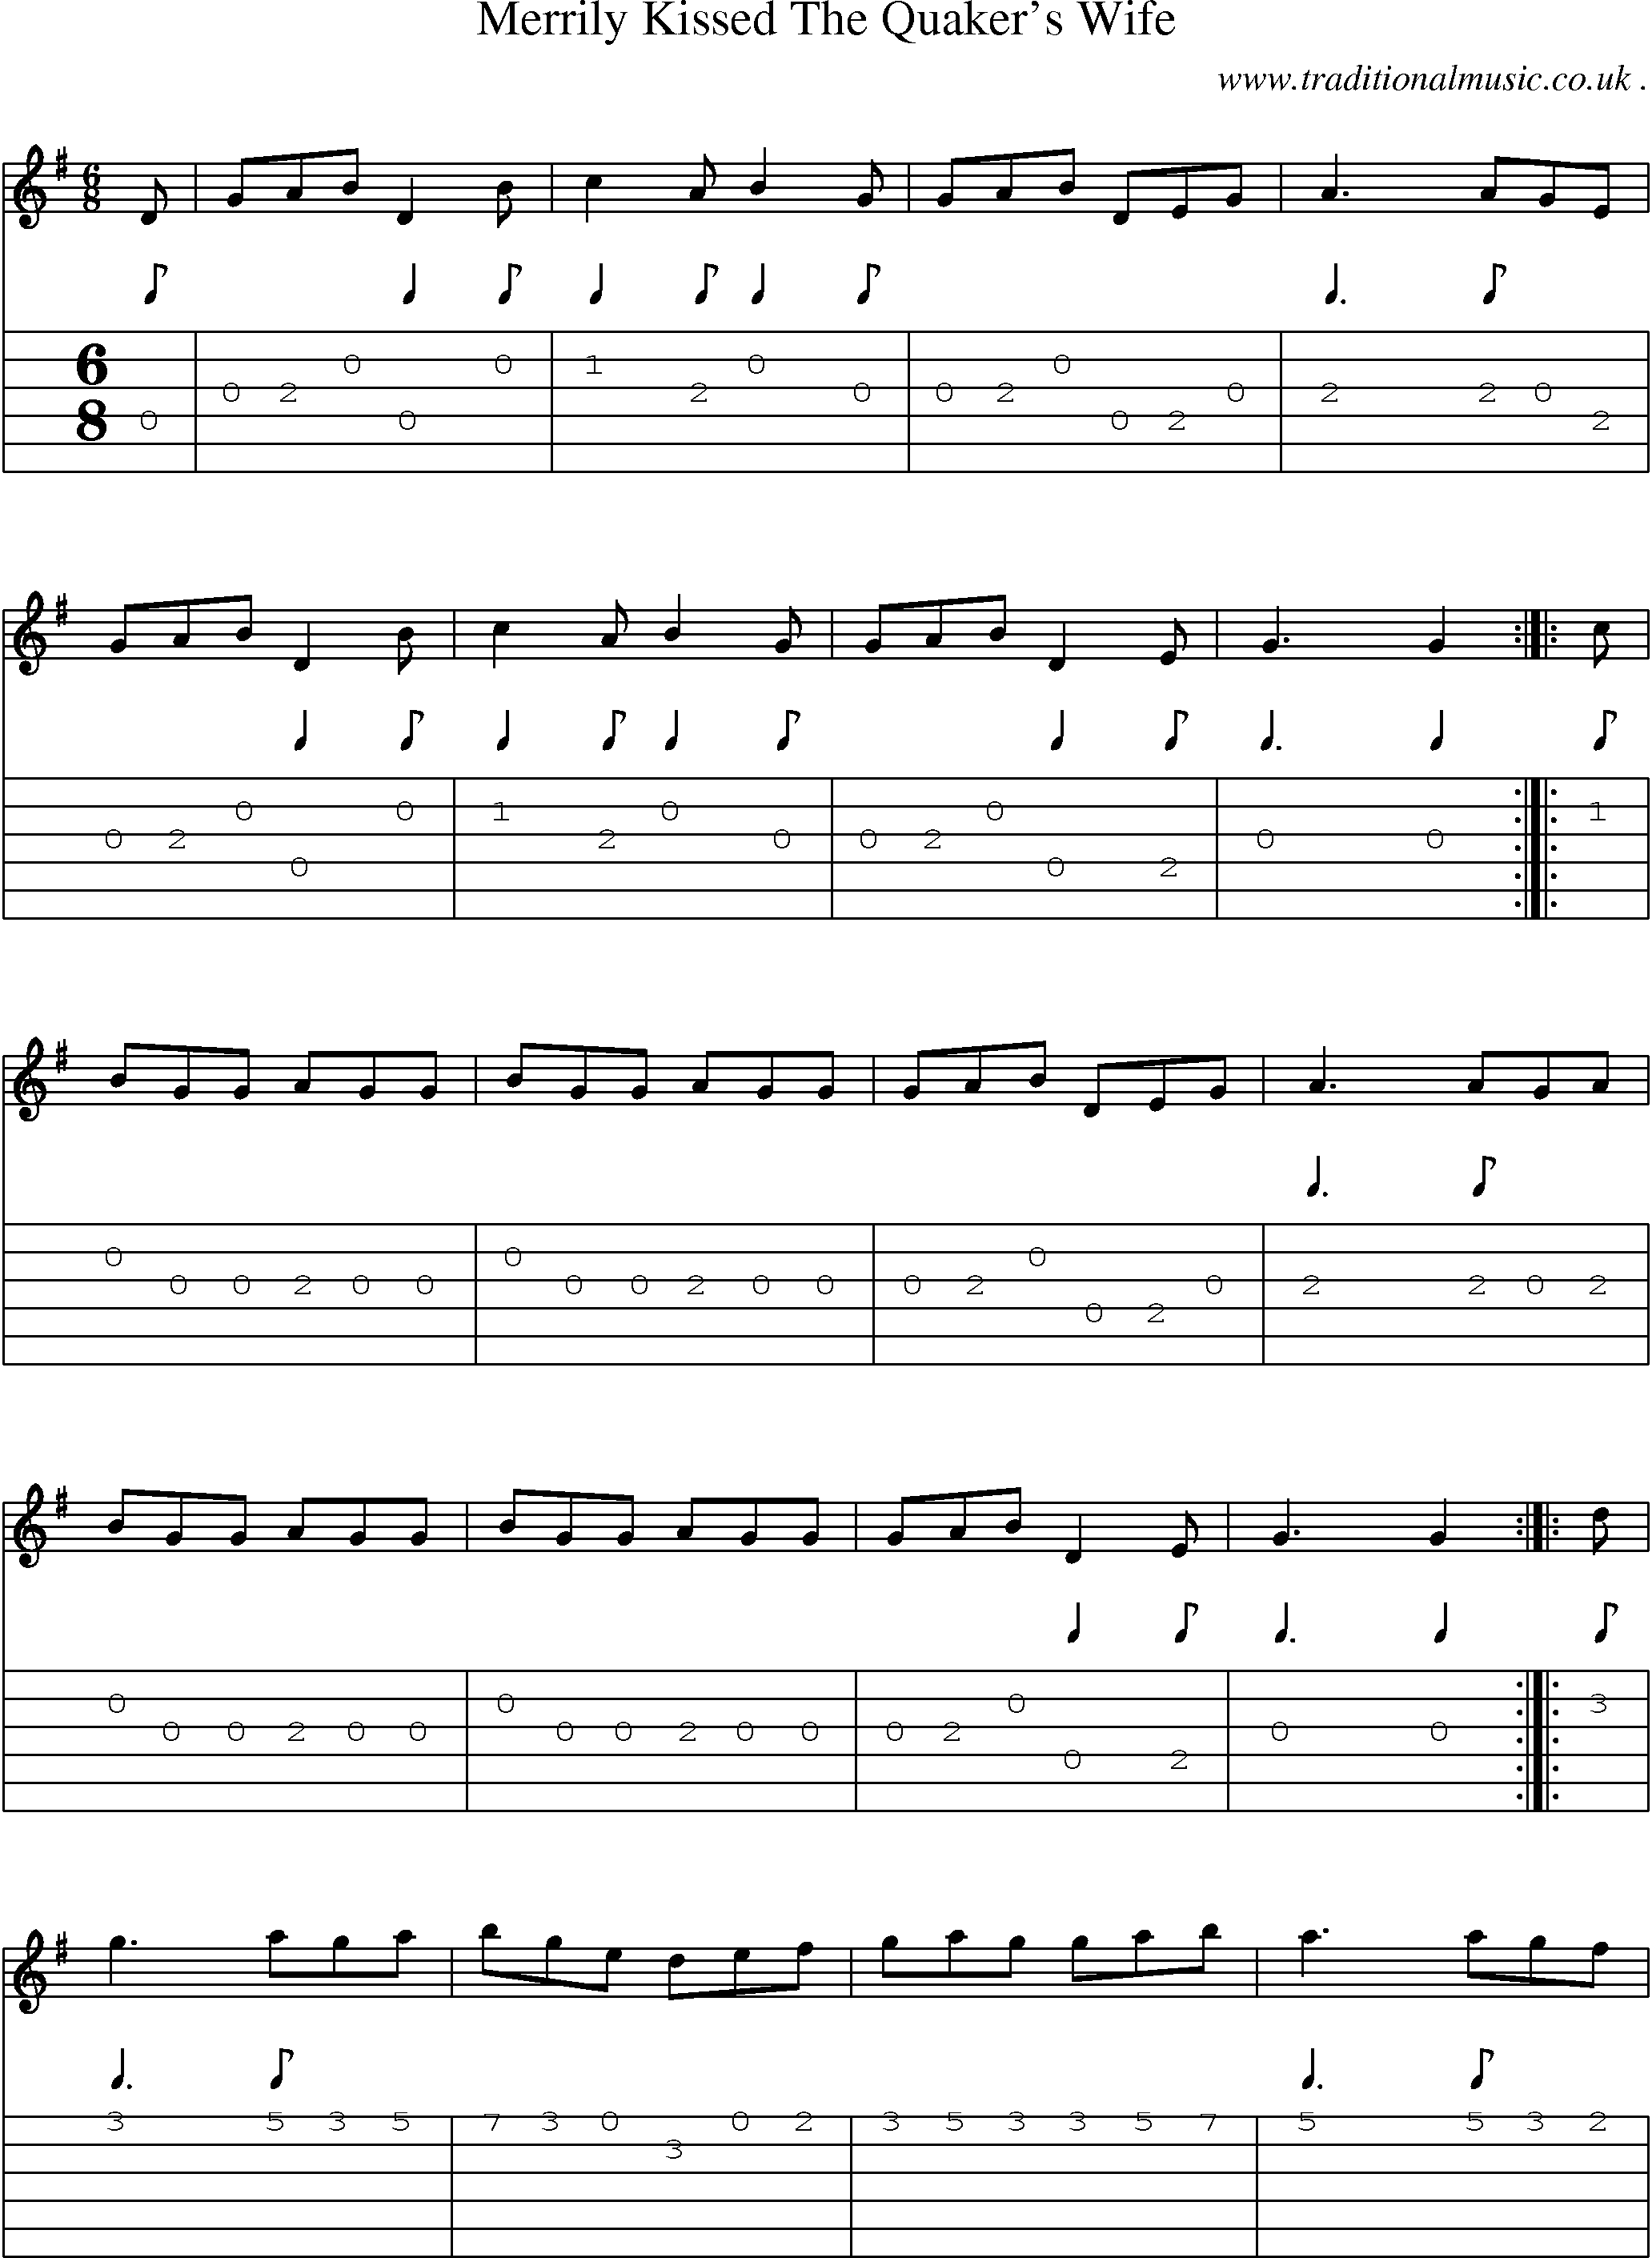 Sheet-Music and Guitar Tabs for Merrily Kissed The Quakers Wife